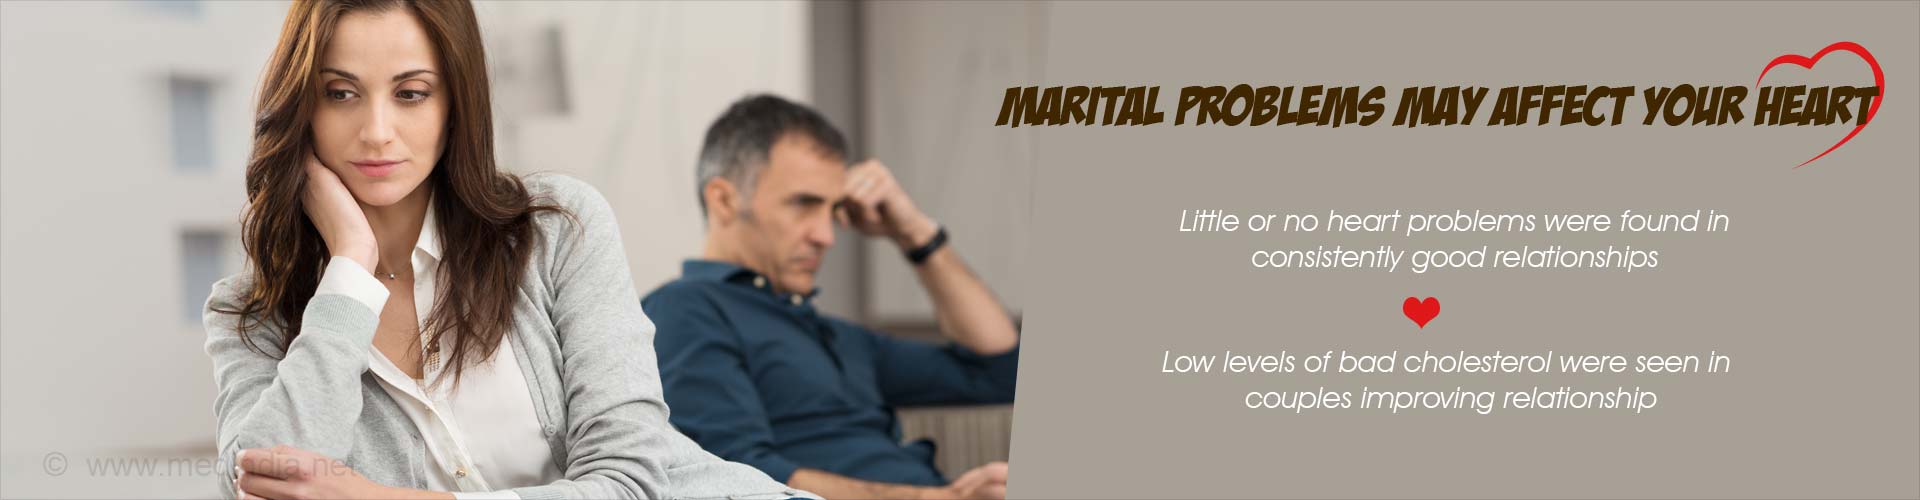 marital problems may affect your heart
- little or no heart problems were found in consistently good relationships
- low levels of bad cholesterol were seen in couples improving relationship